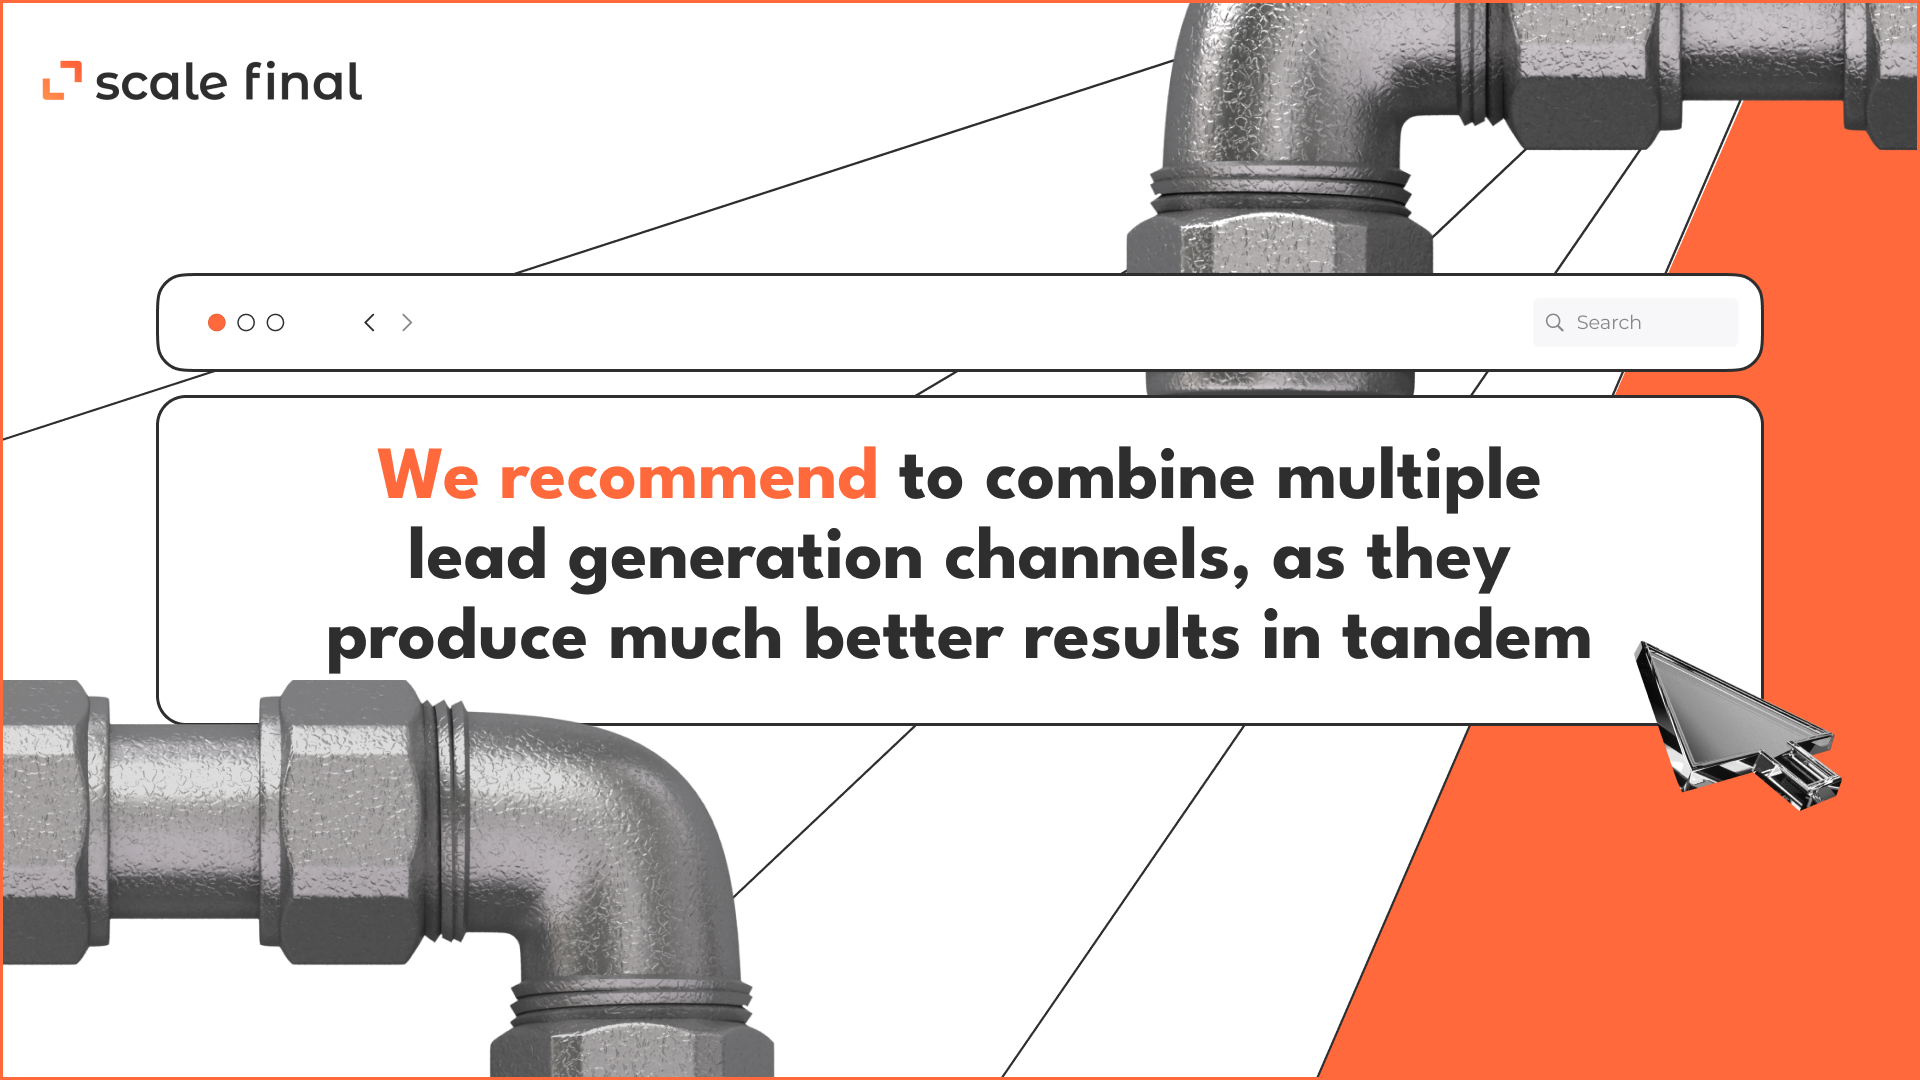 We recommend to combine multiple lead generation channels, as they produce much better results in tandem.